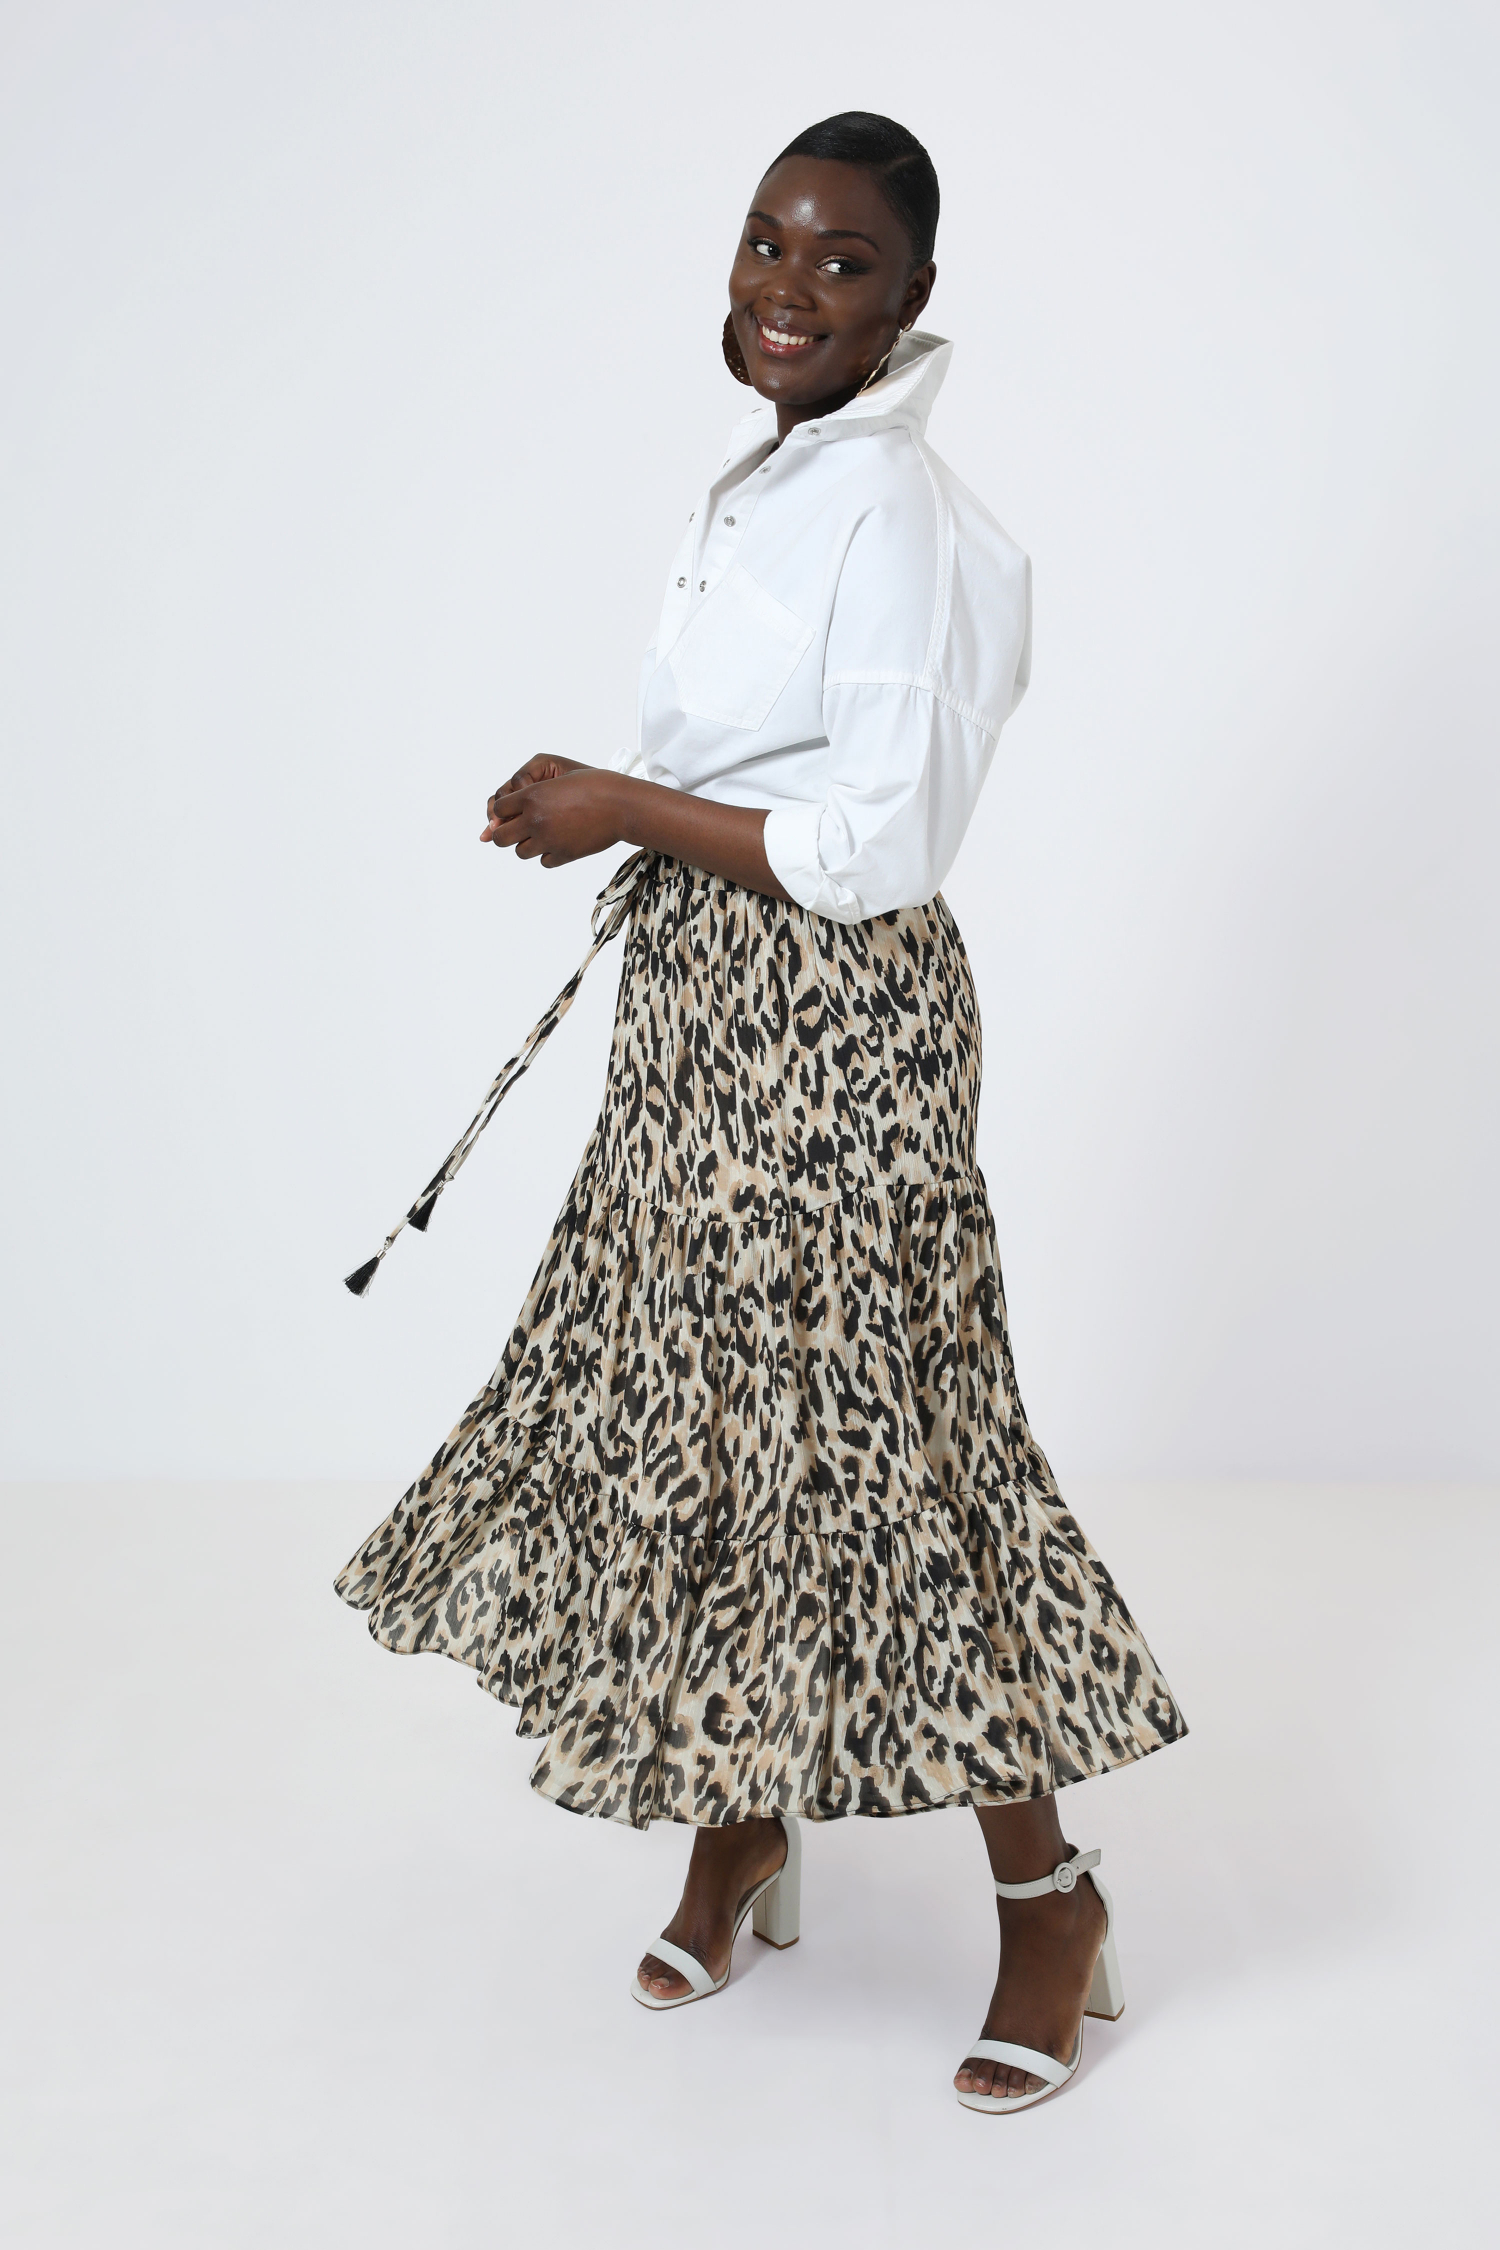 Bohemian style skirt in printed voile